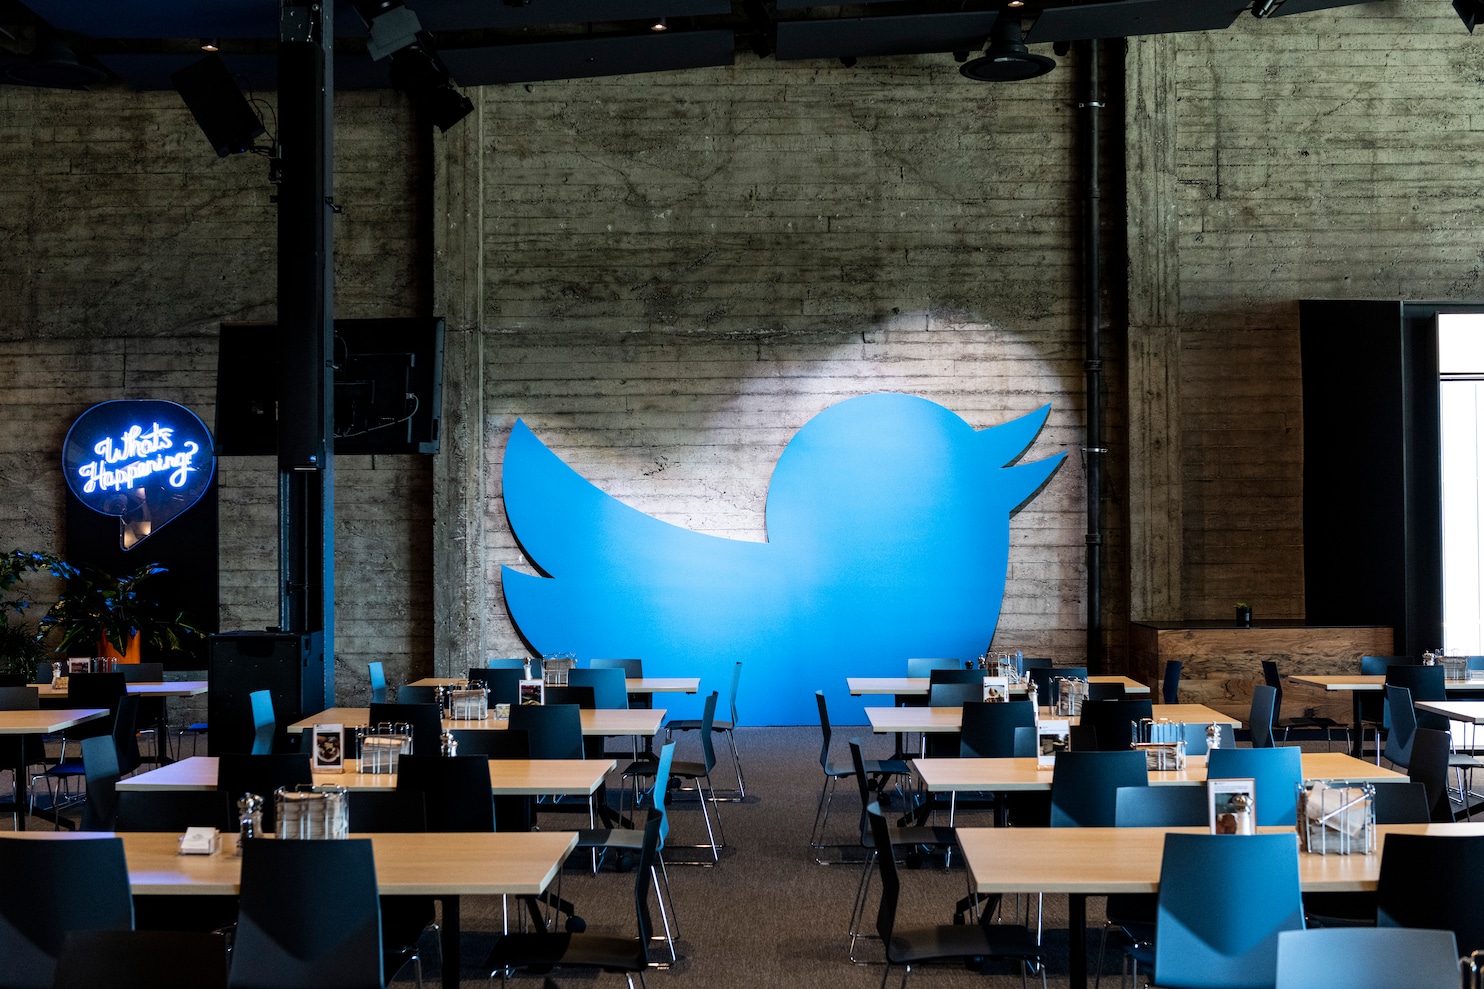 Twitter asks some laid-off employees to return after being fired: Report